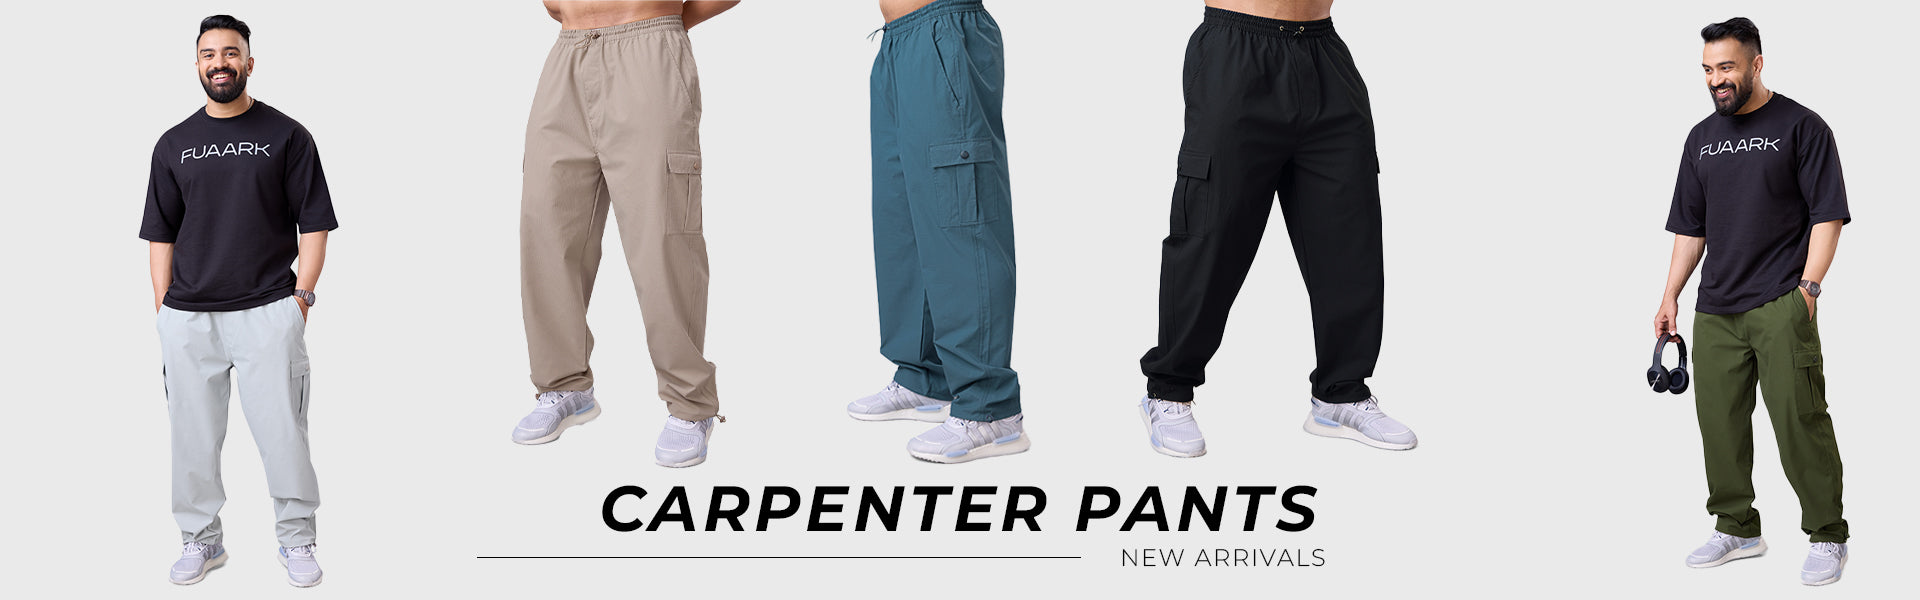 Are jogger pants just the male version of leggings? - Quora